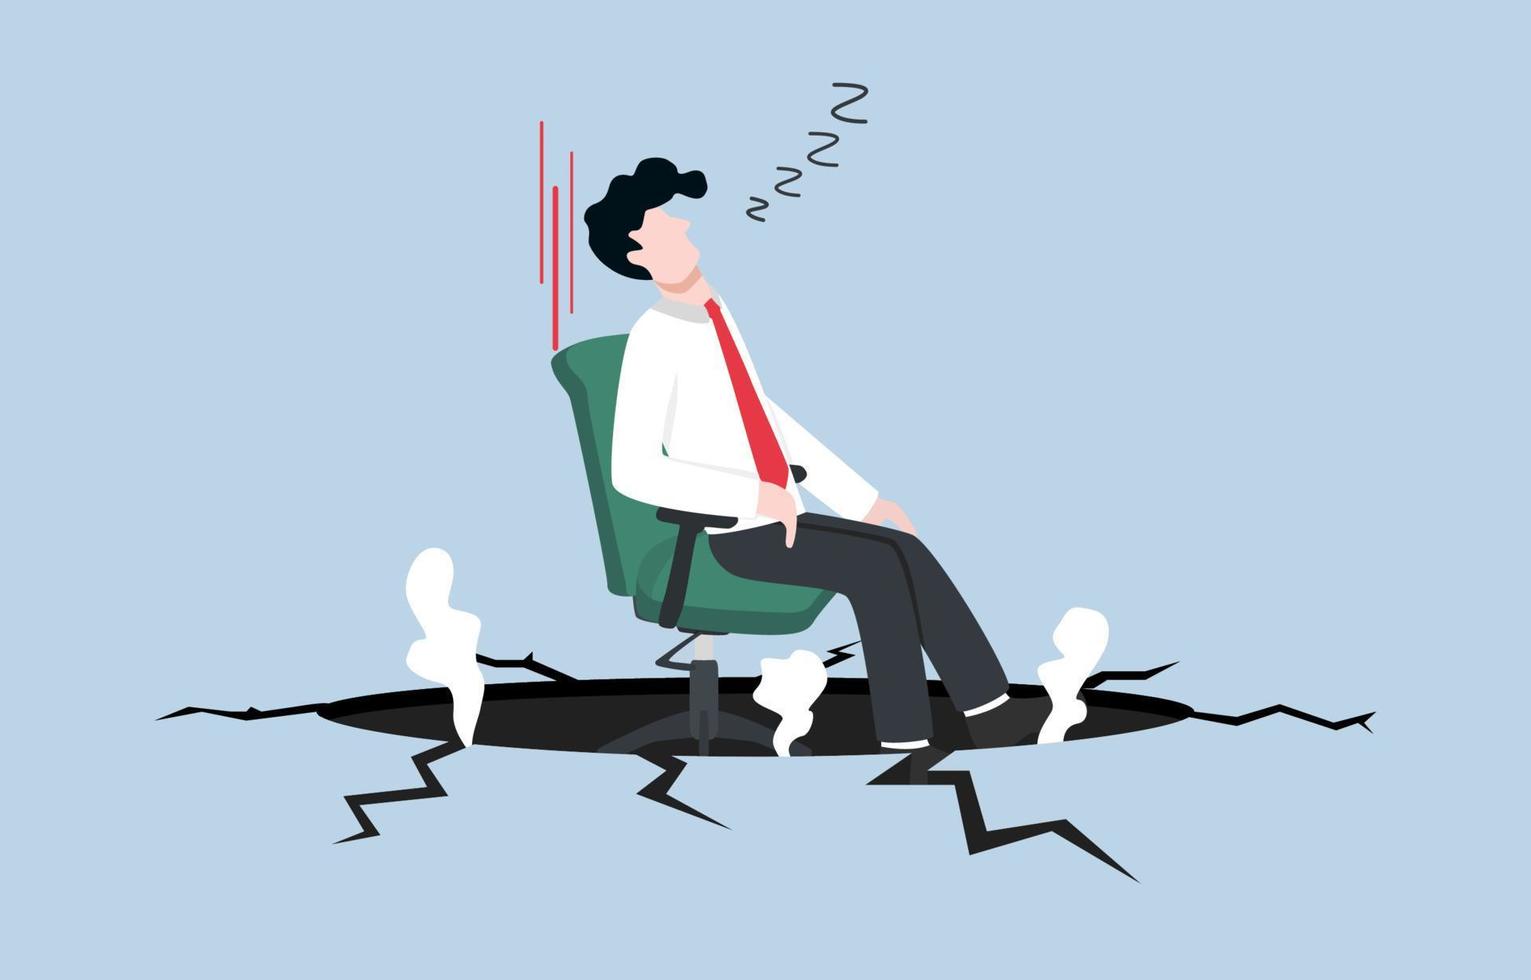 Work inefficiency, laziness employee in organization, procrastination, postpone tasks to do later, taking a nap during working hours concept, Businessman sleeping on office chair falling into hole. vector